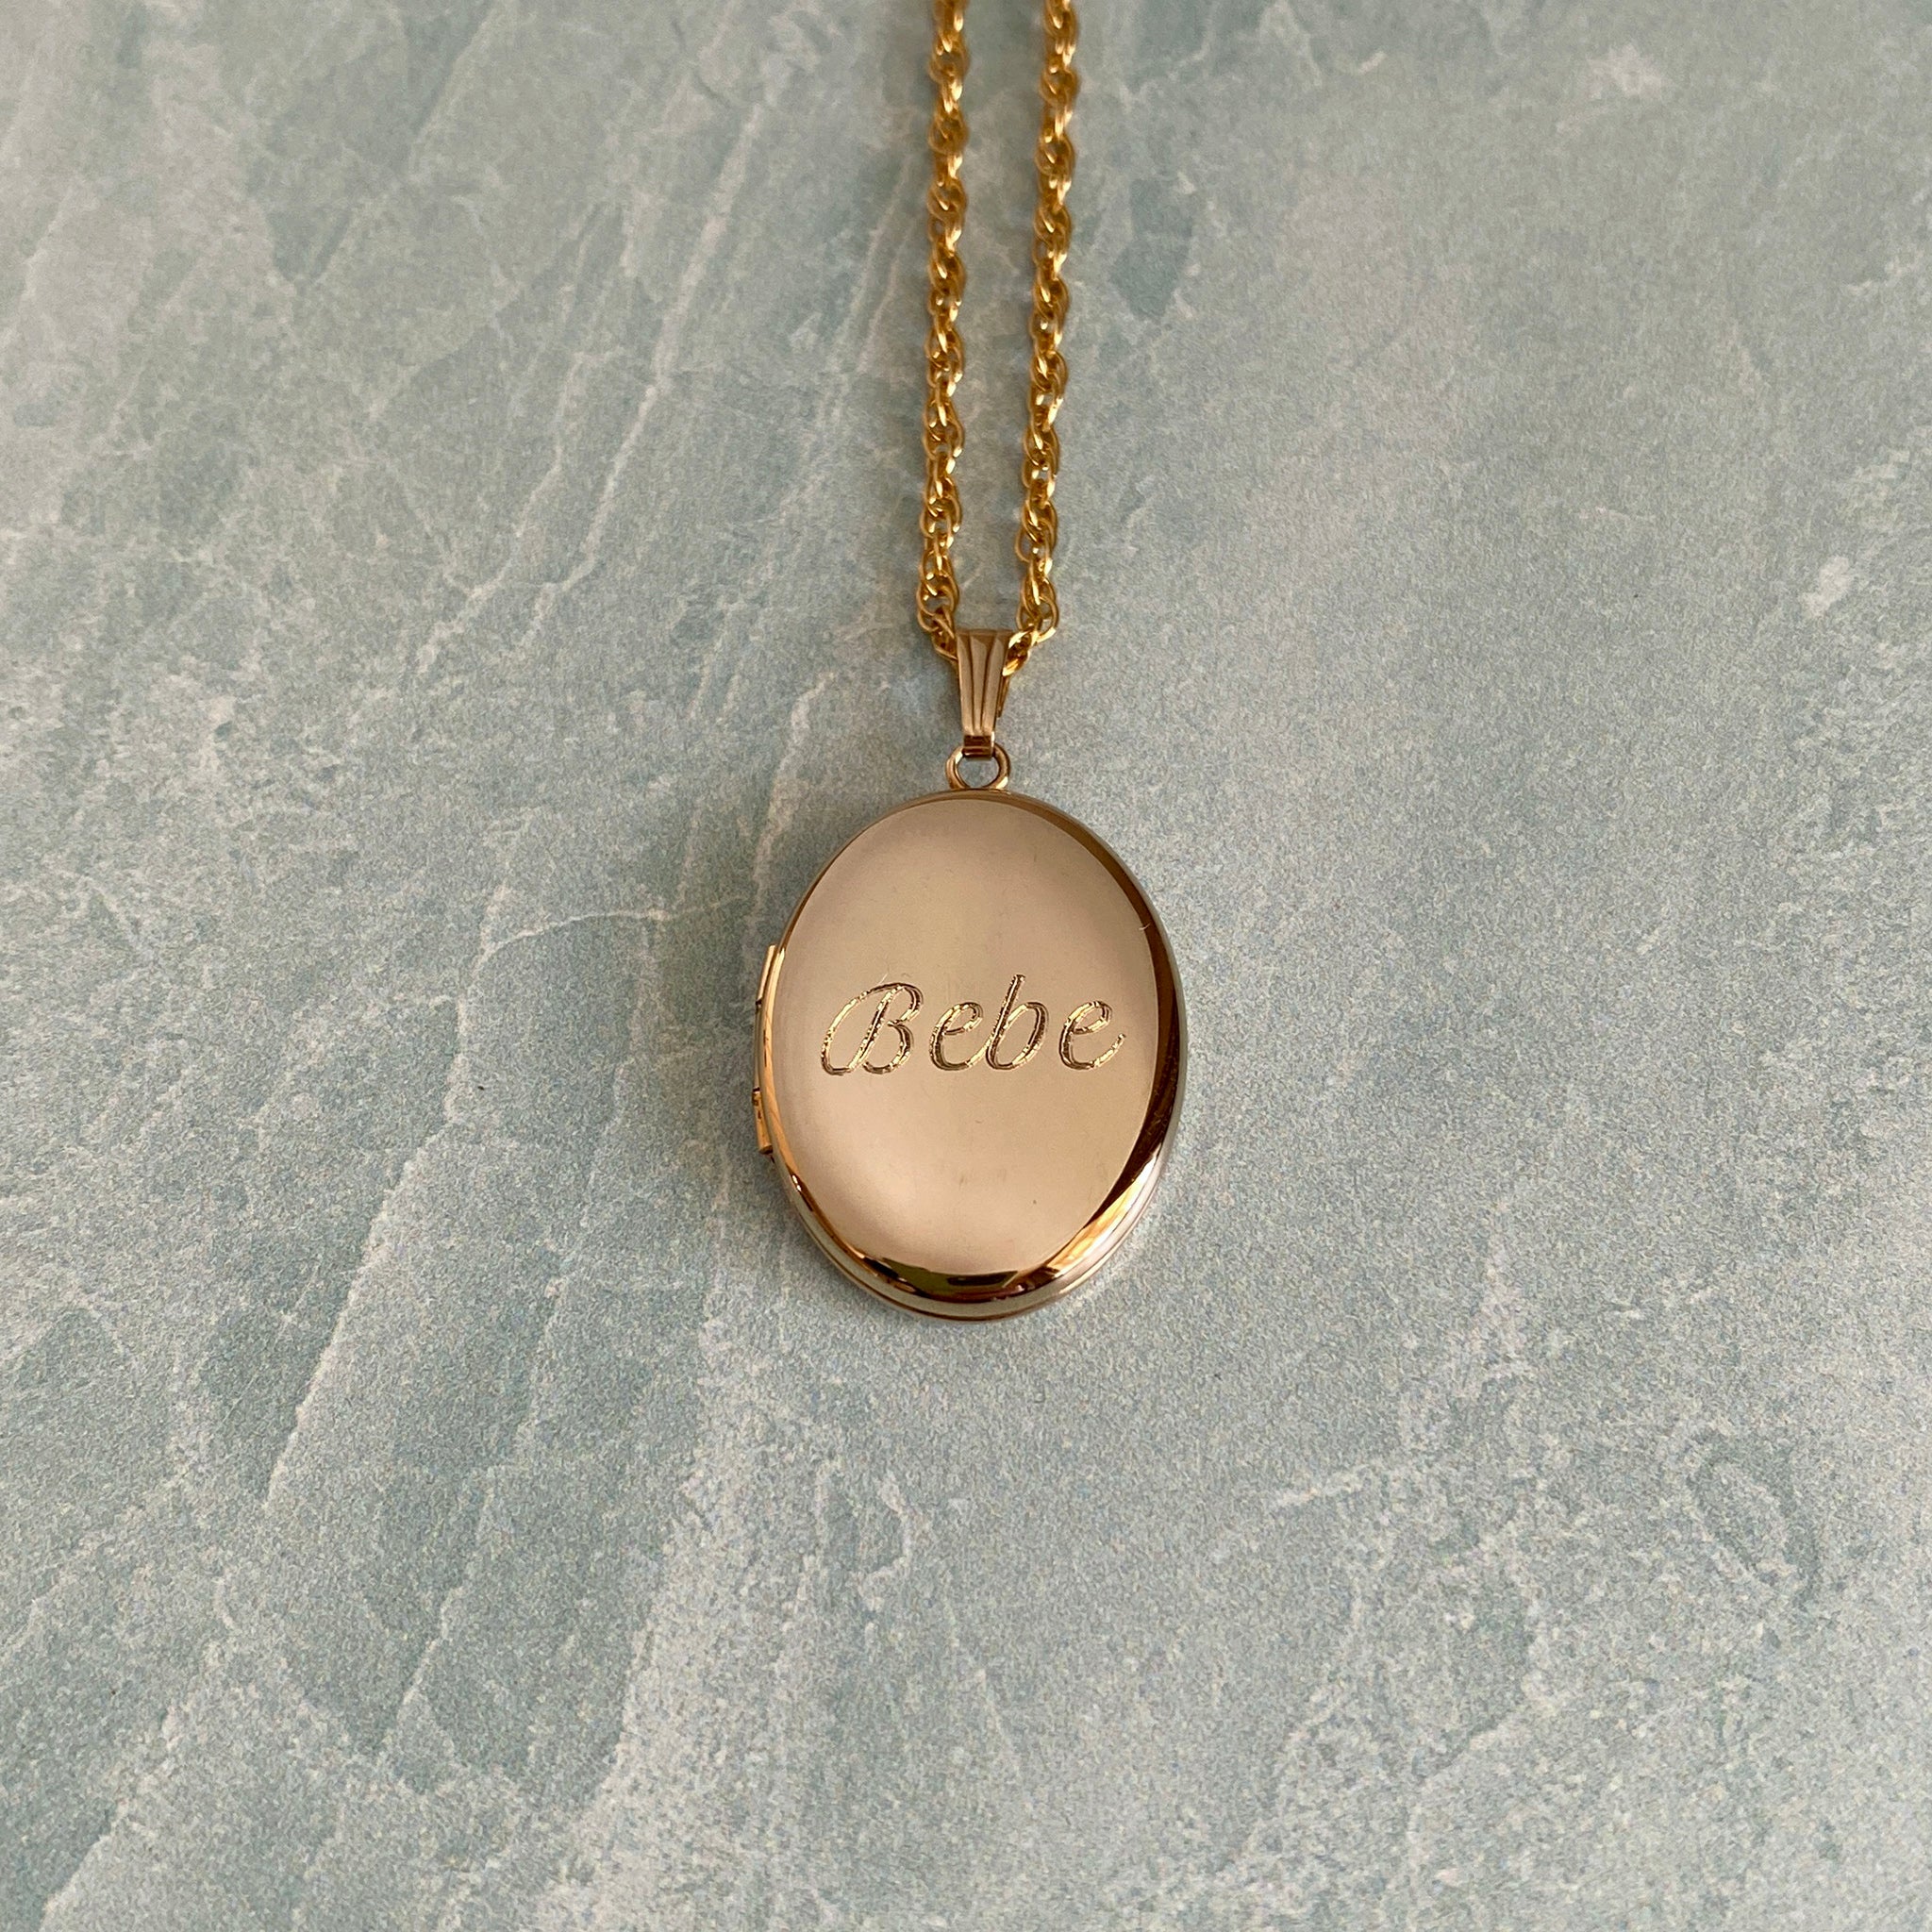 14K Gold Filled 20x25mm Oval Locket Necklace with machine engraved name